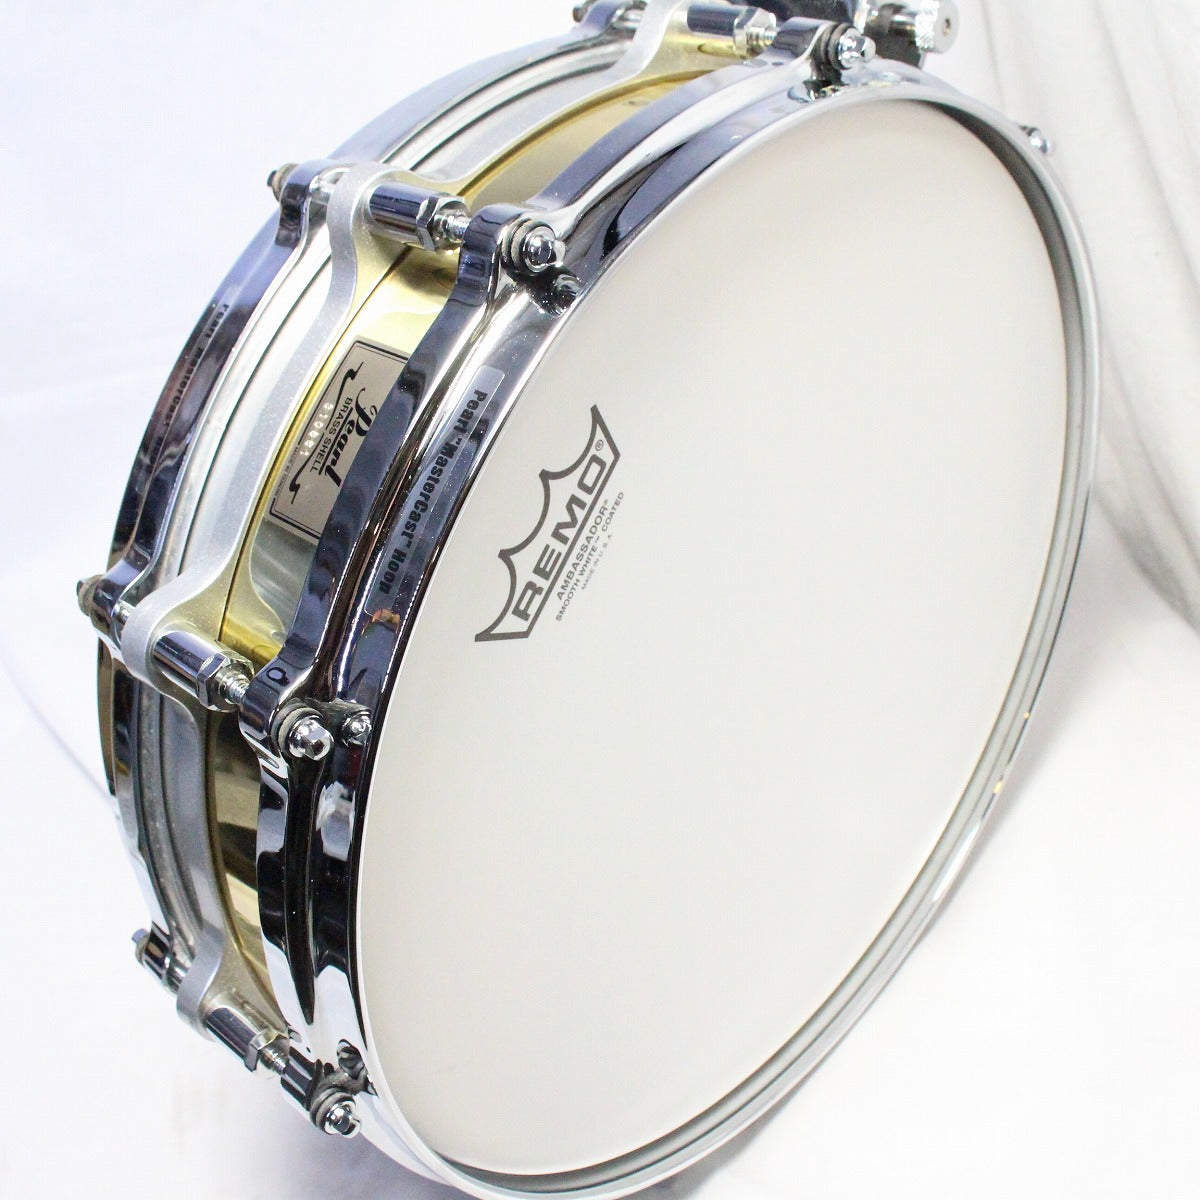 [SN 310861] USED PEARL / B-9114P 14x3.5 Flee Floating Brass Piccolo Pearl Snare Drum [08]